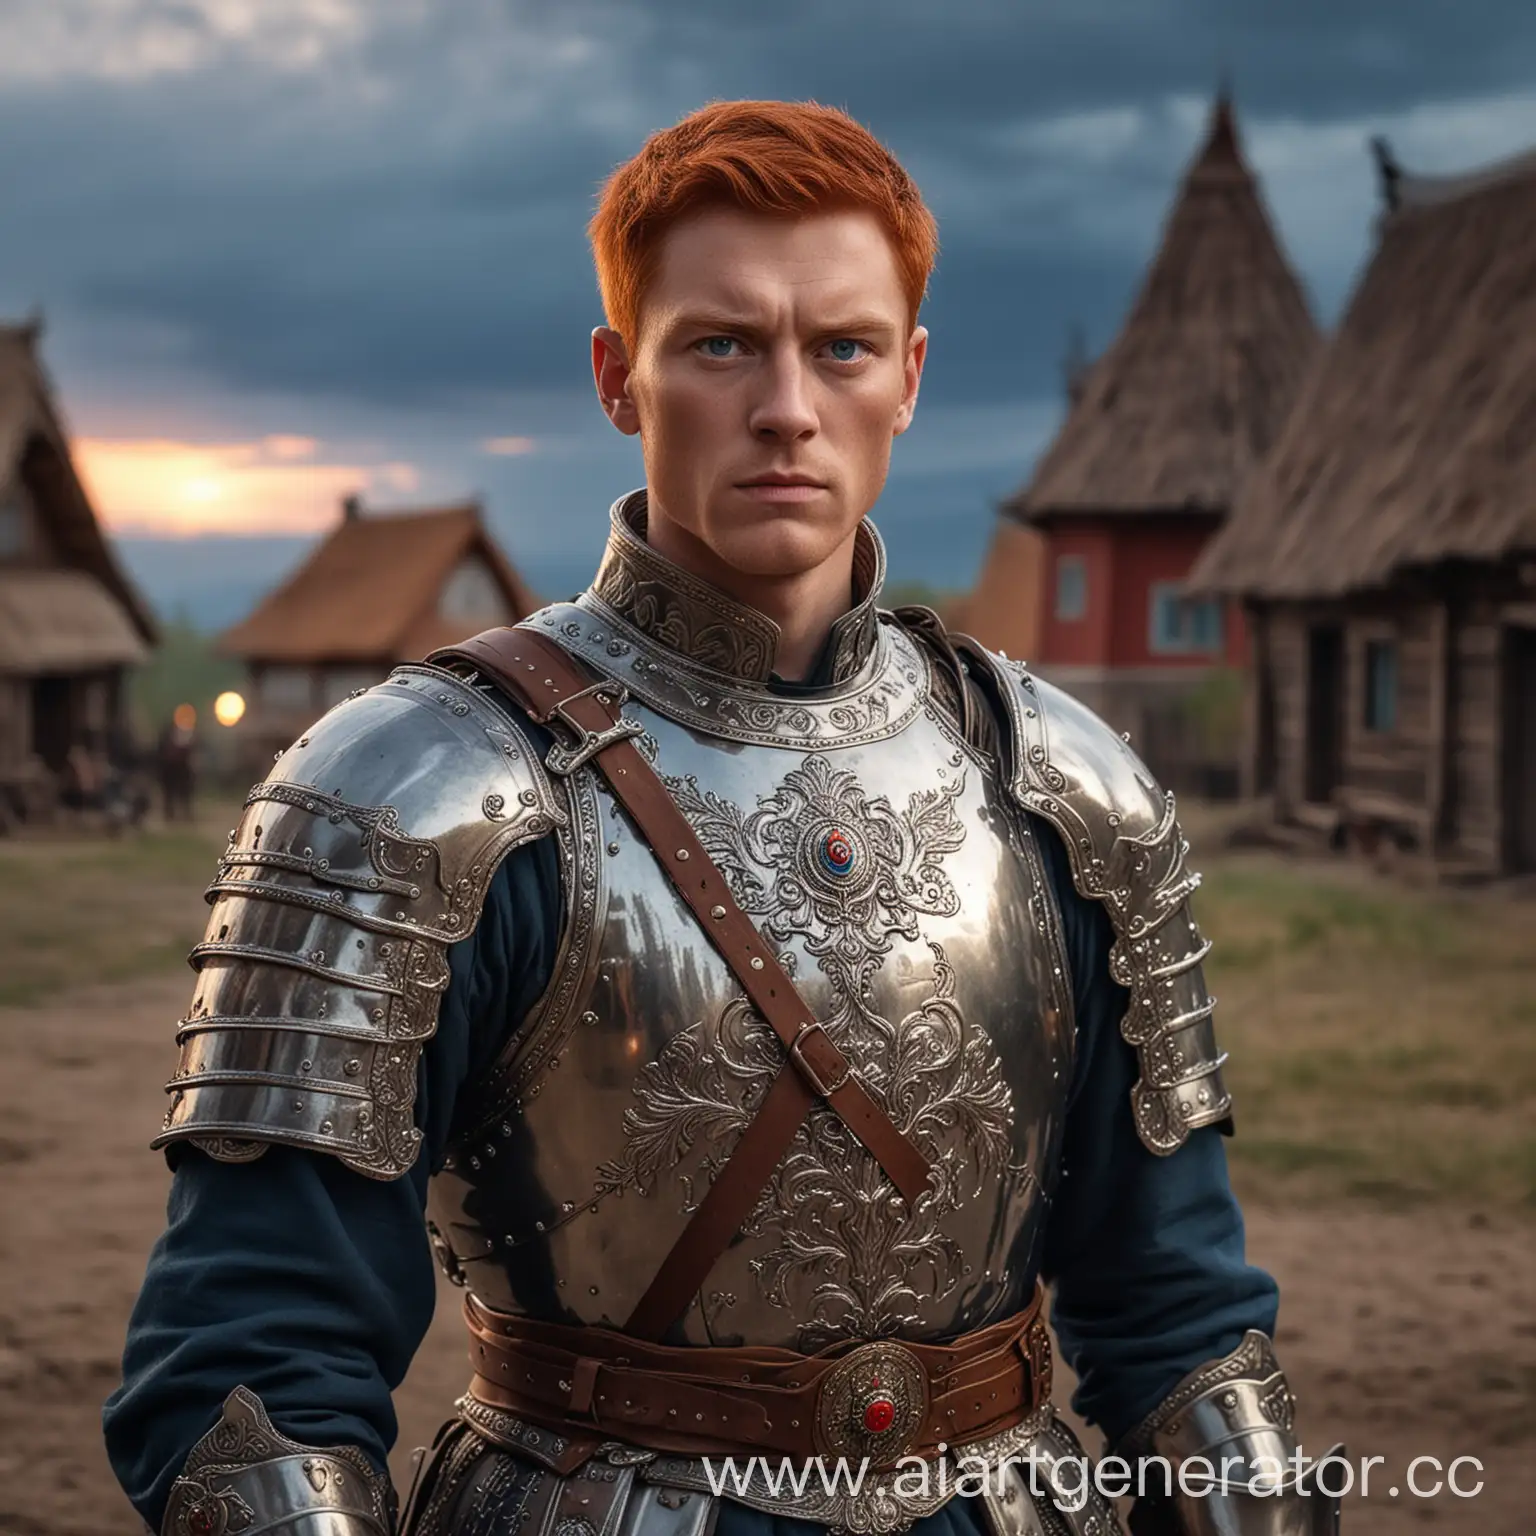 Portrait-of-a-RedHaired-Nobleman-in-Armor-with-Sword-in-Russian-Village-at-Dusk